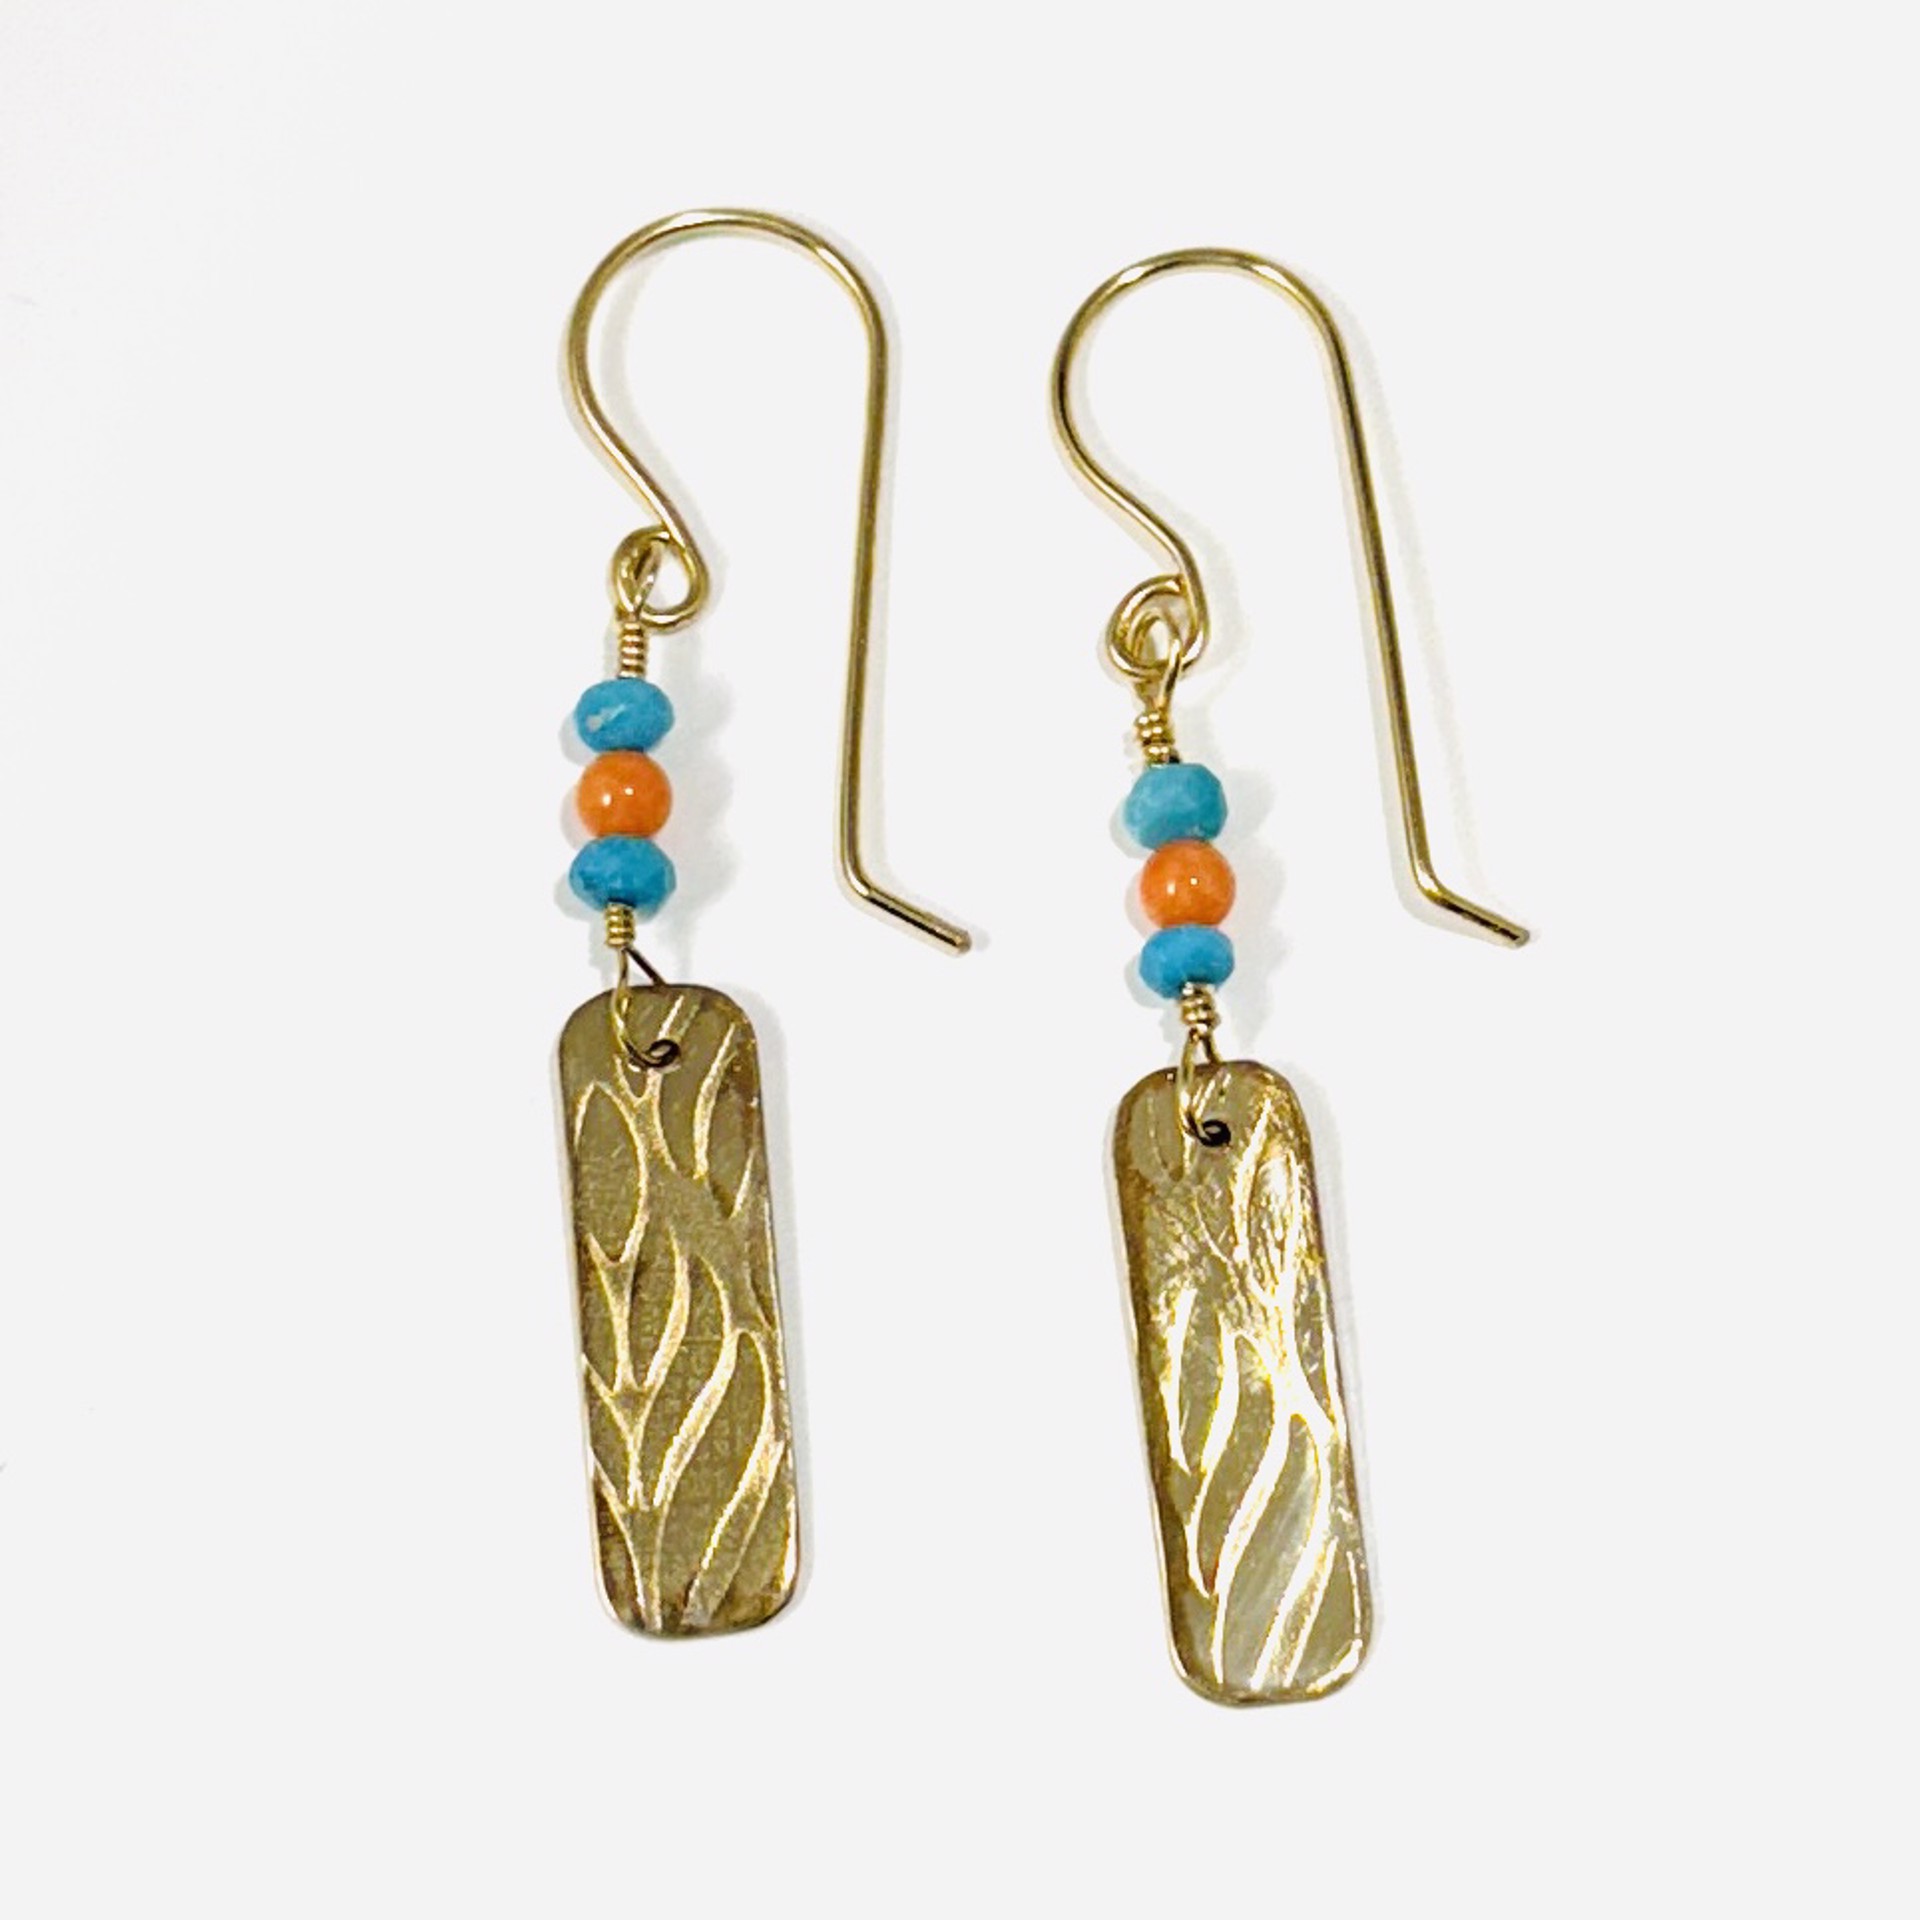 Sleeping Beaurty Turquoise, Coral Beads with 14Kgf Paddle Drop Earrings AB23-95 by Anne Bivens